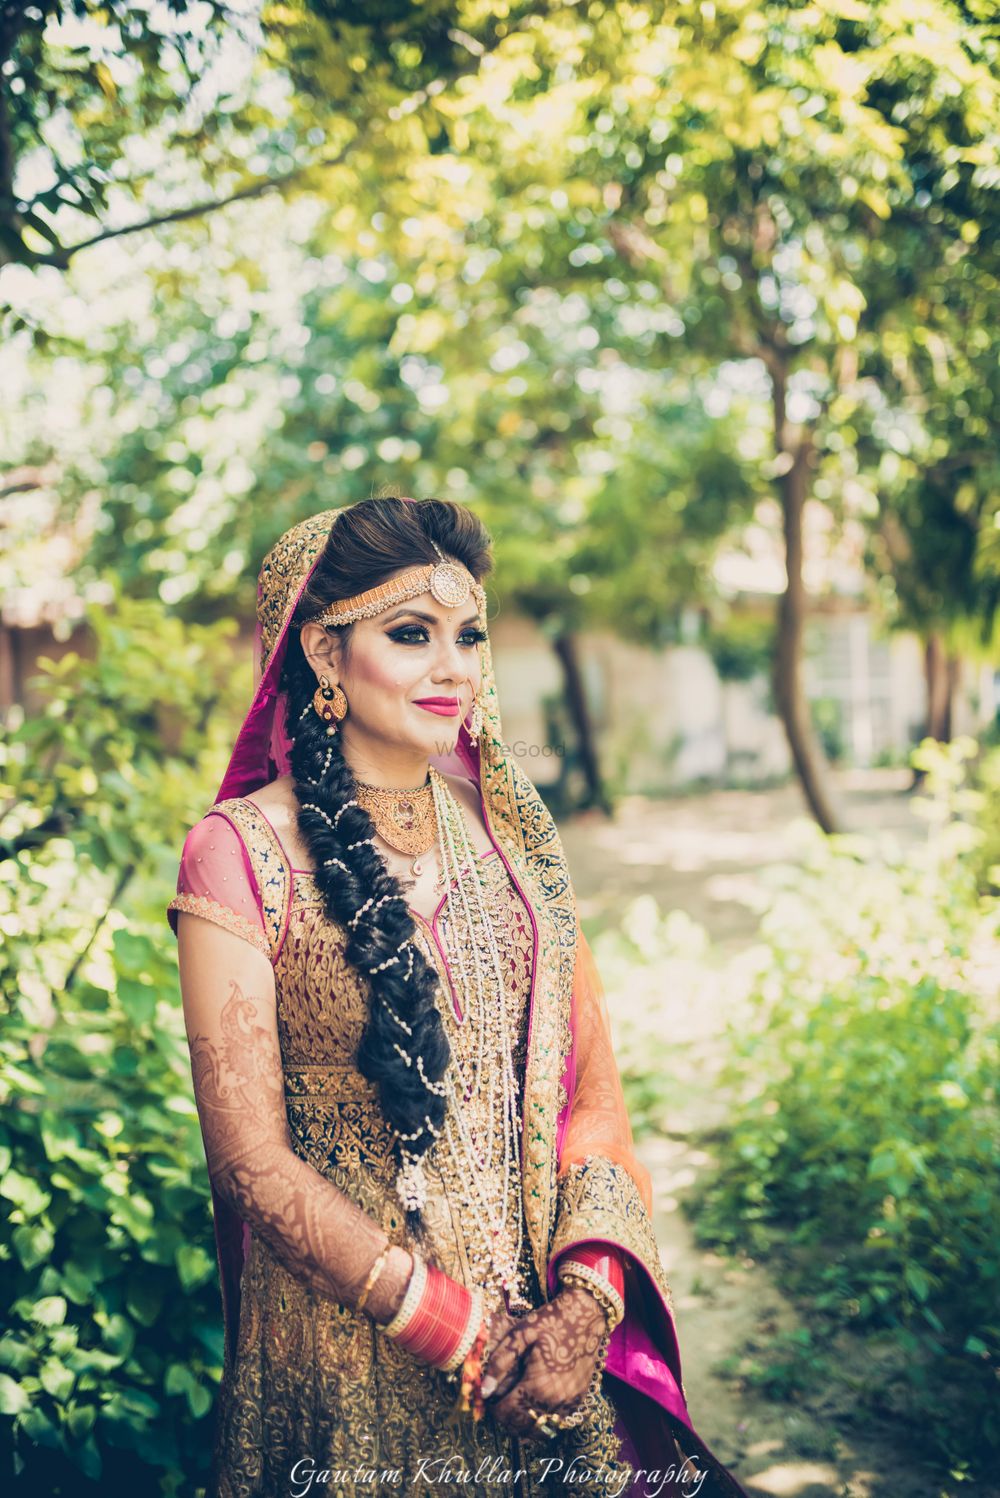 Photo of Sikh bride with braided hairstyle